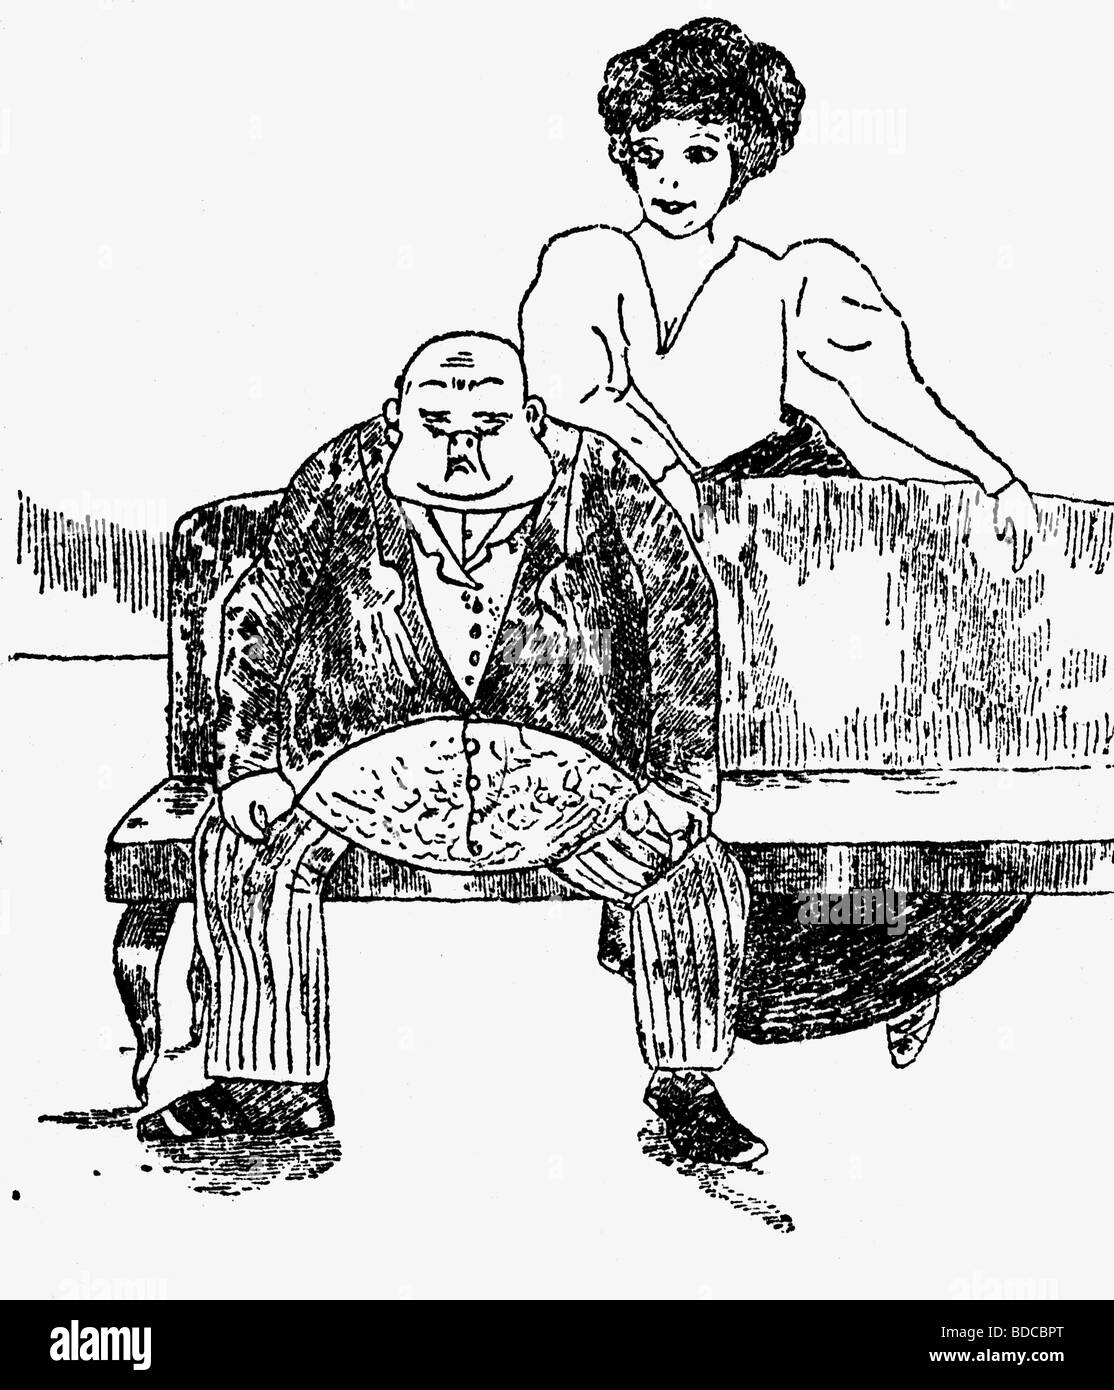 Mann, Thomas, 6.6.1875 - 12.8.1955, German author / writer, lawyer Jakoby and his wife from the novel 'Luischen', drawing by Thomas Mann, Stock Photo